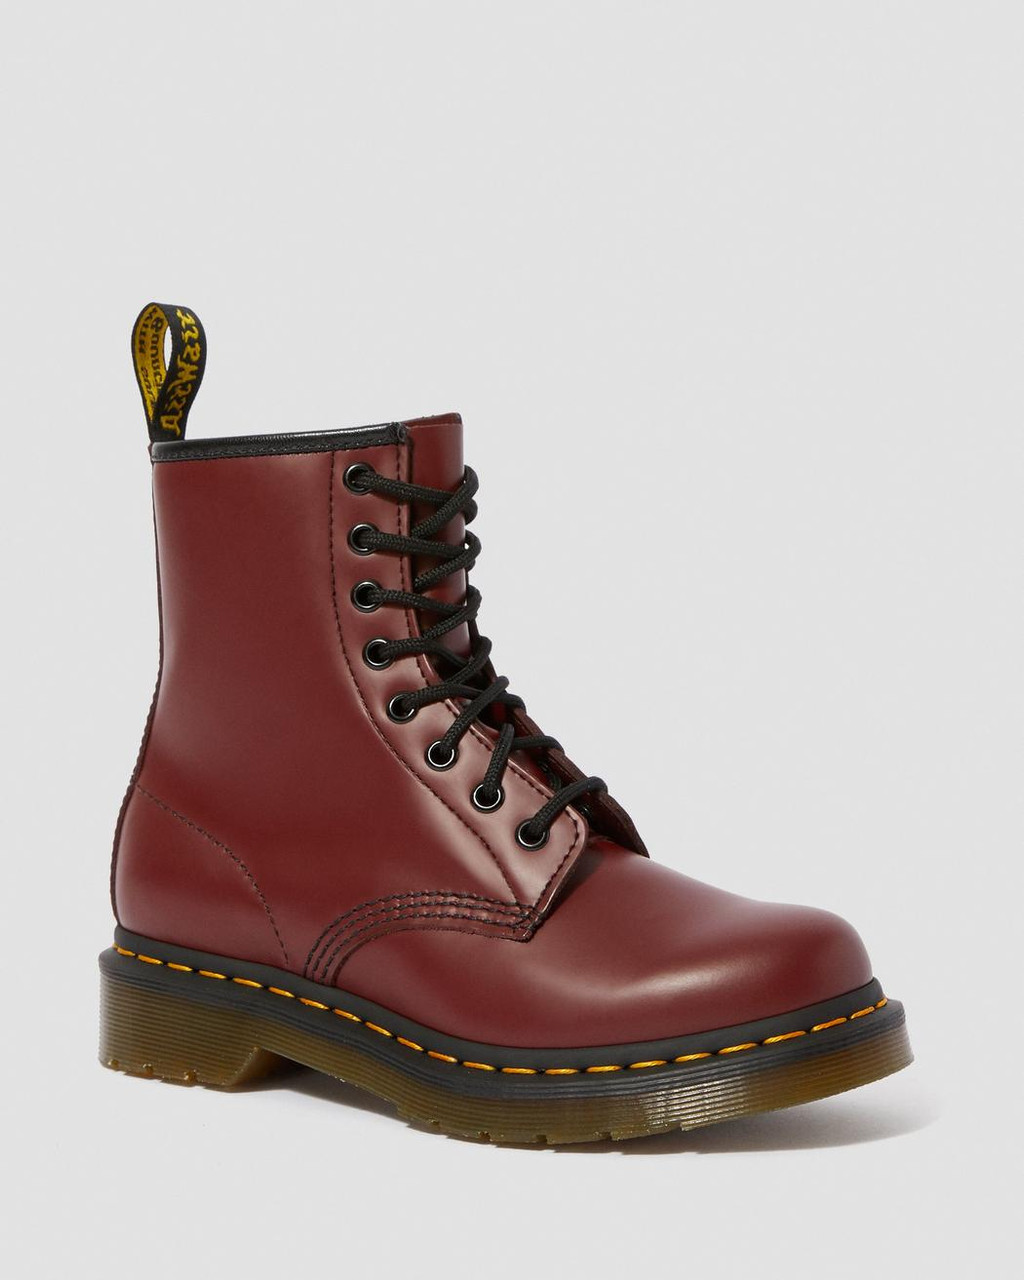 Dr. Martens Women's 1460 Cherry Red Smooth Leather